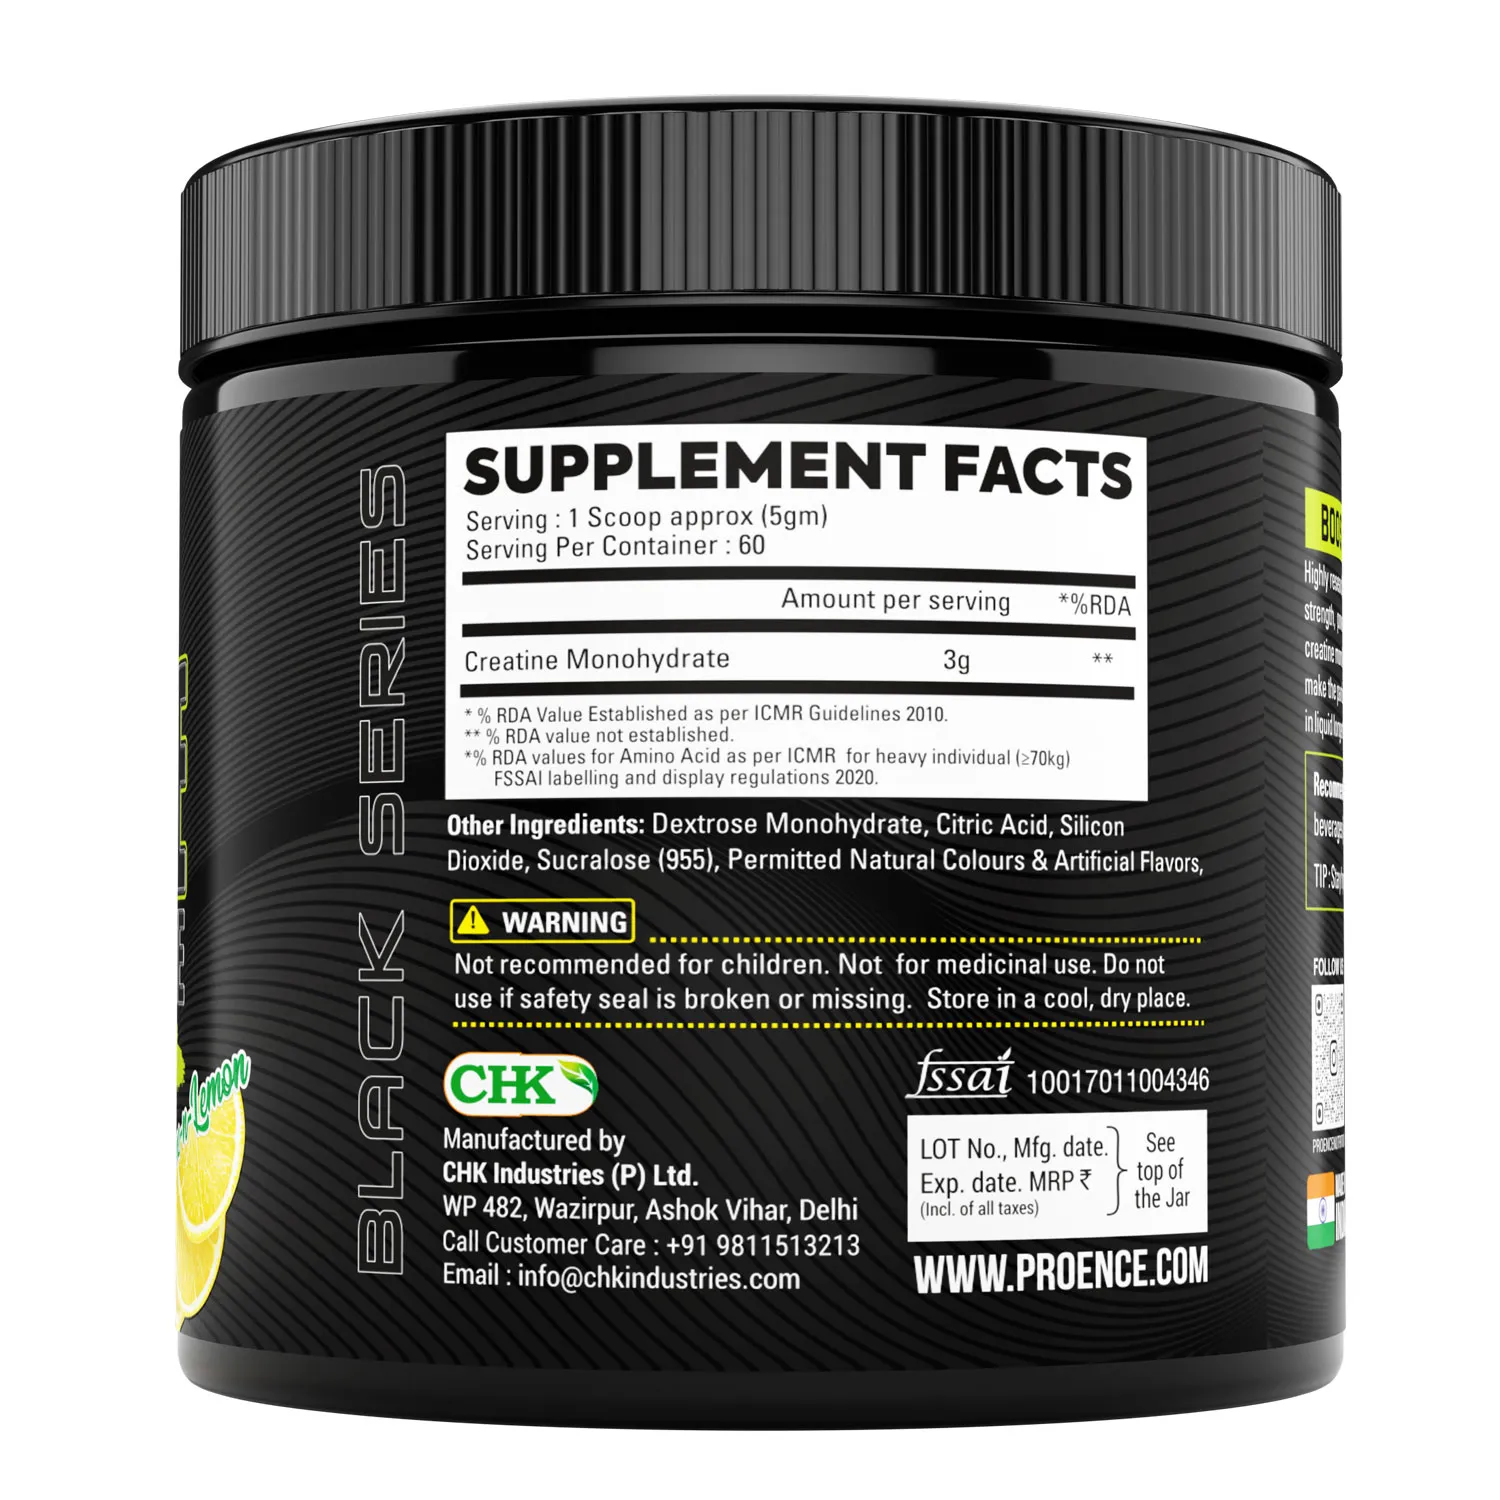 Proence Creatine Monohydrate | Pre/Post Workout Supplement Powder For Muscle Repair And Recovery